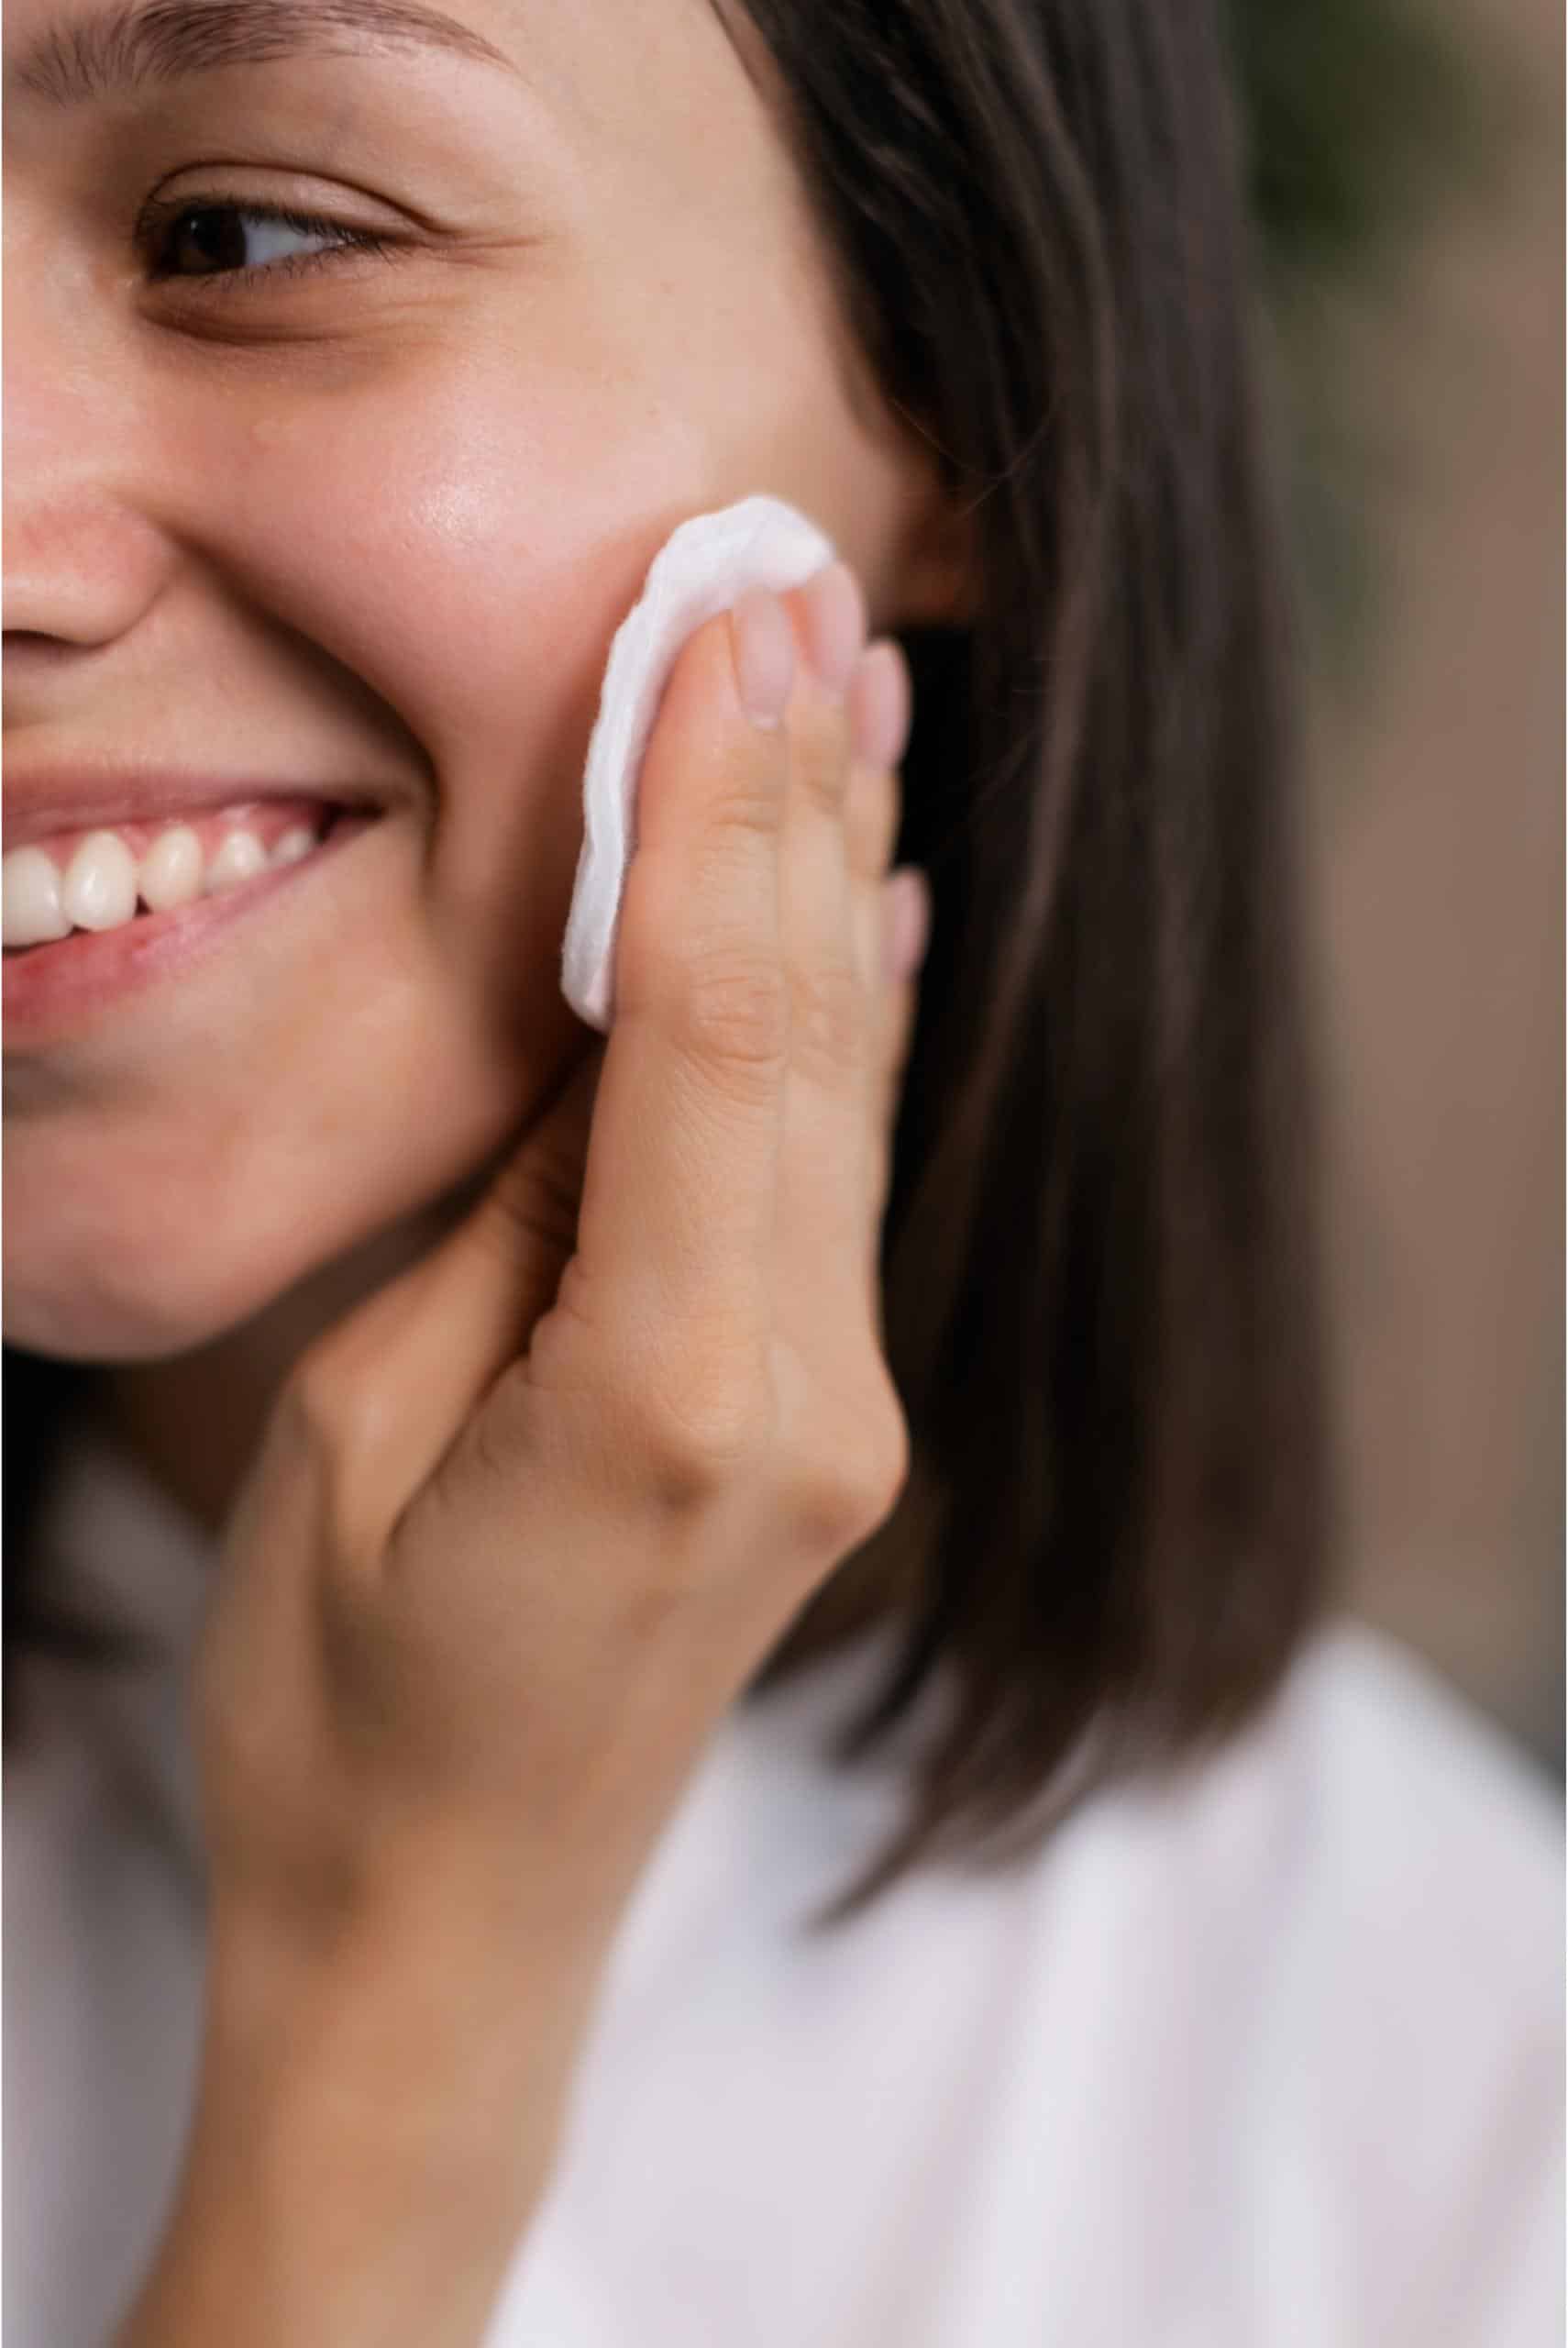 woman smiling while wiping her face with cotton